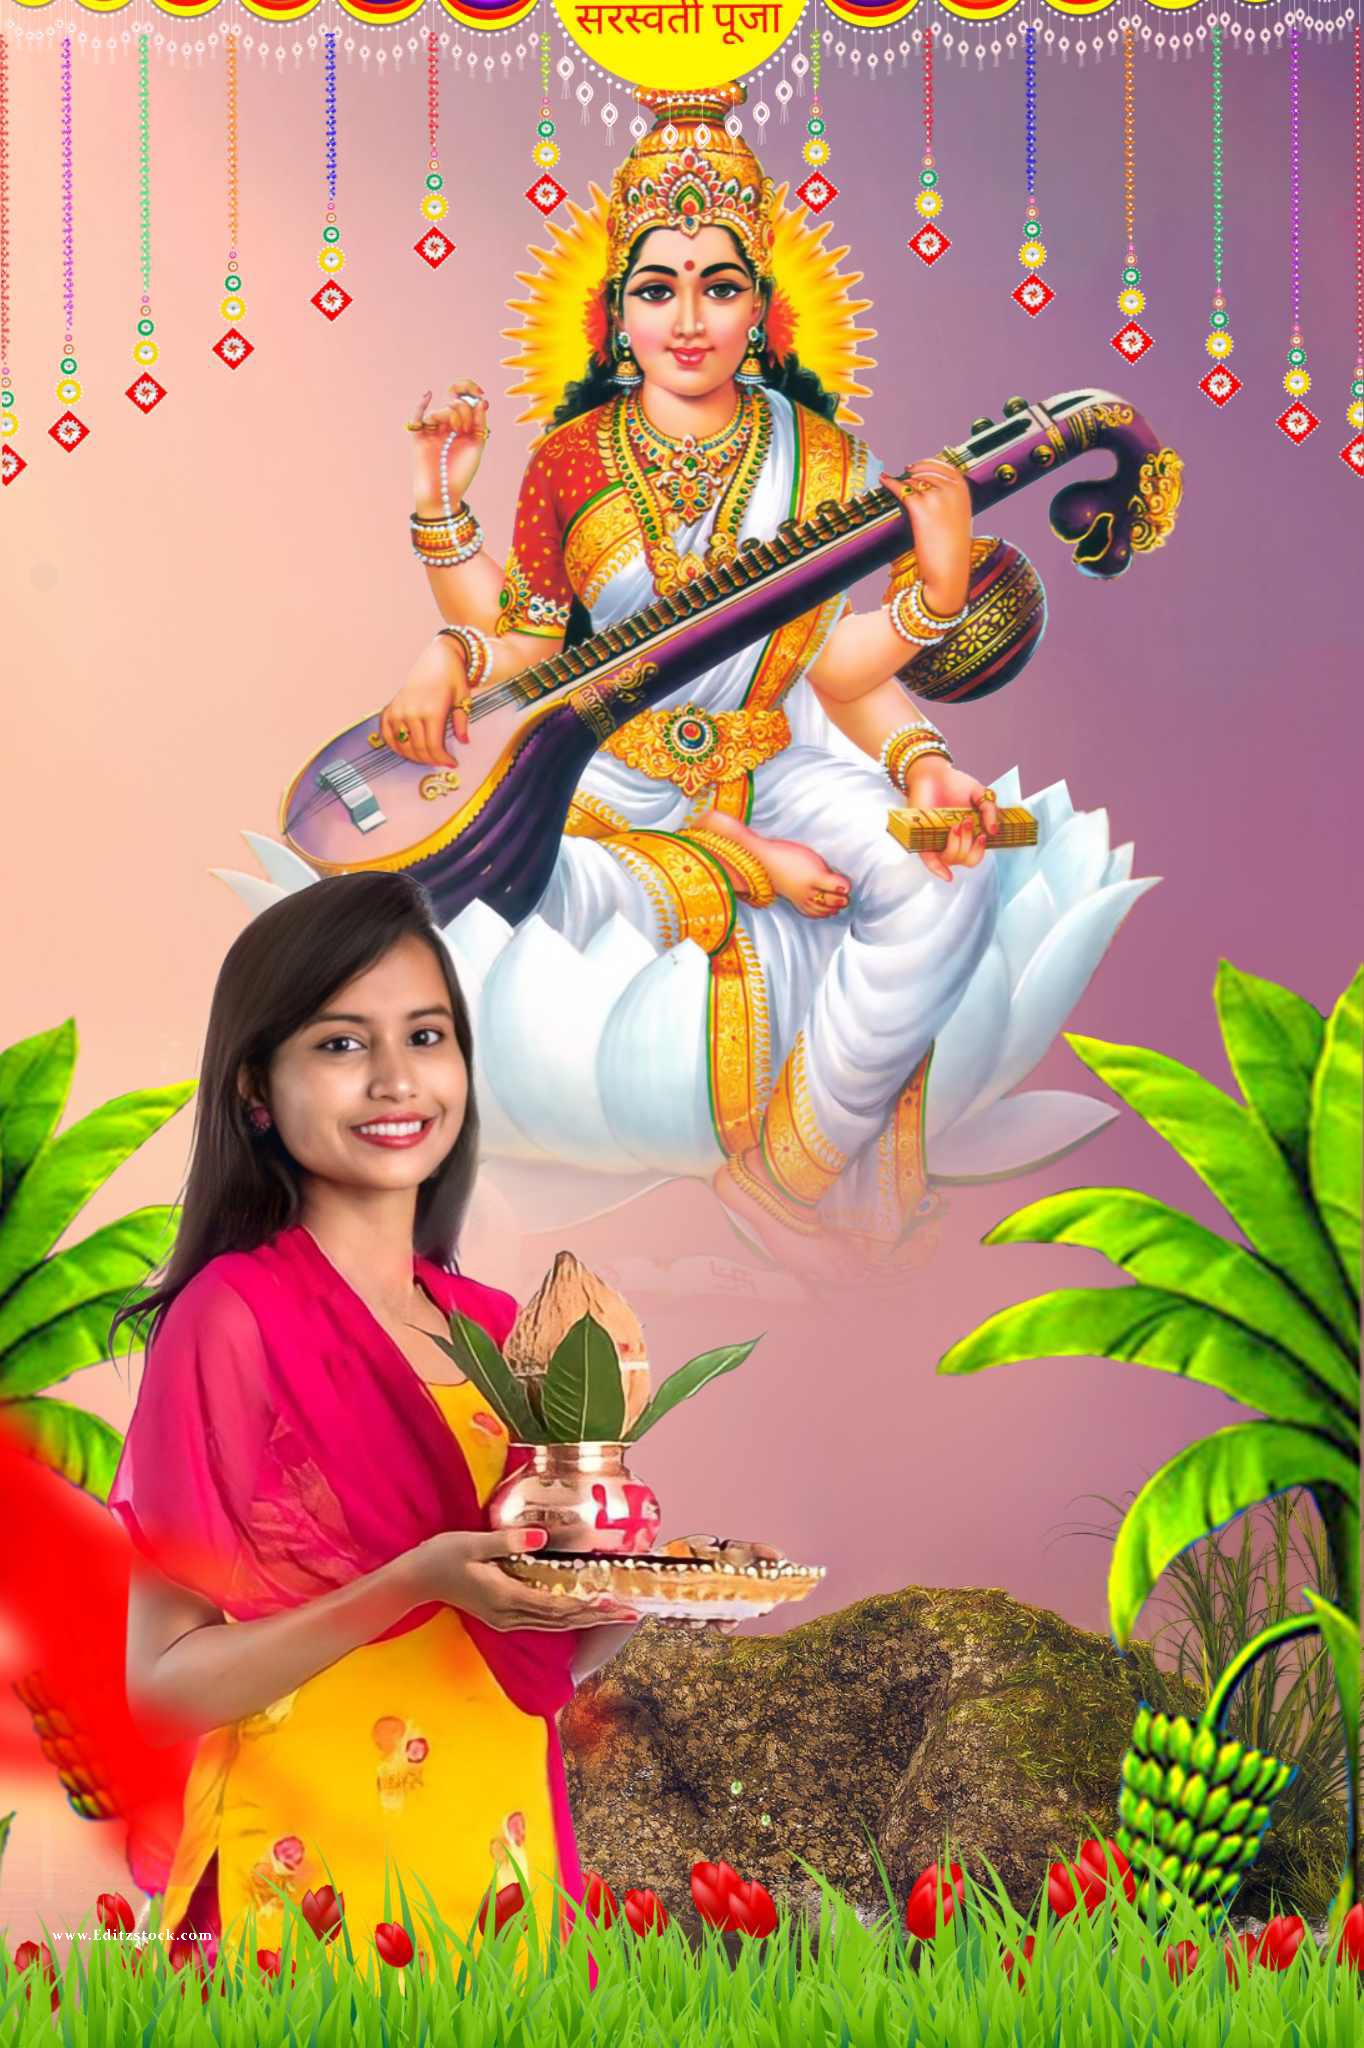 Saraswati puja editing background 2022 with girl banner poster by Editzstock.com